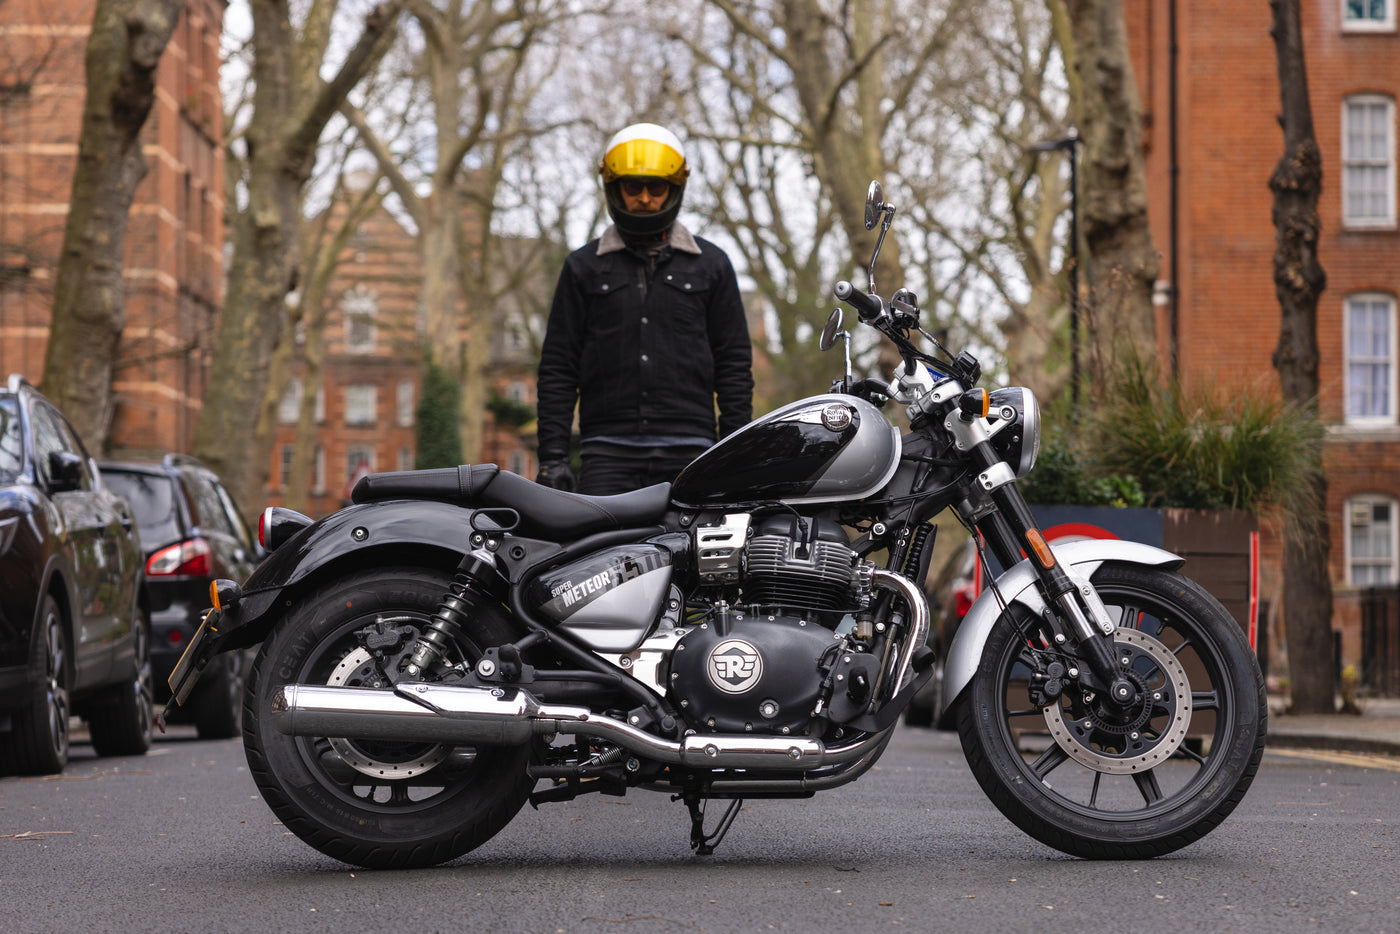 Royal Enfield Super Meteor - First Date